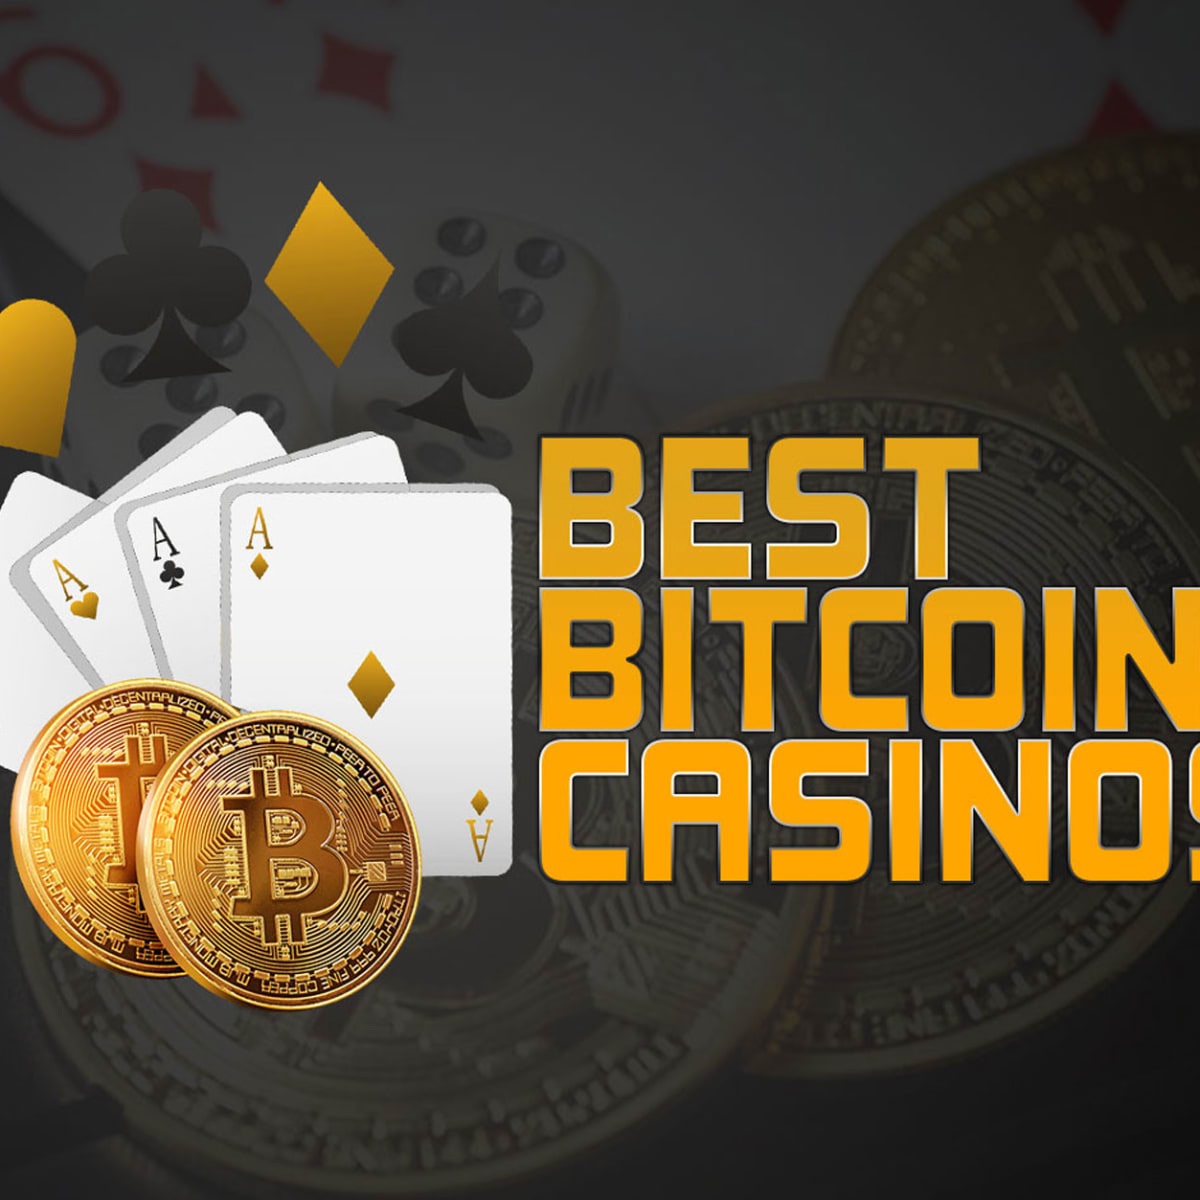 The Most and Least Effective Ideas In casino